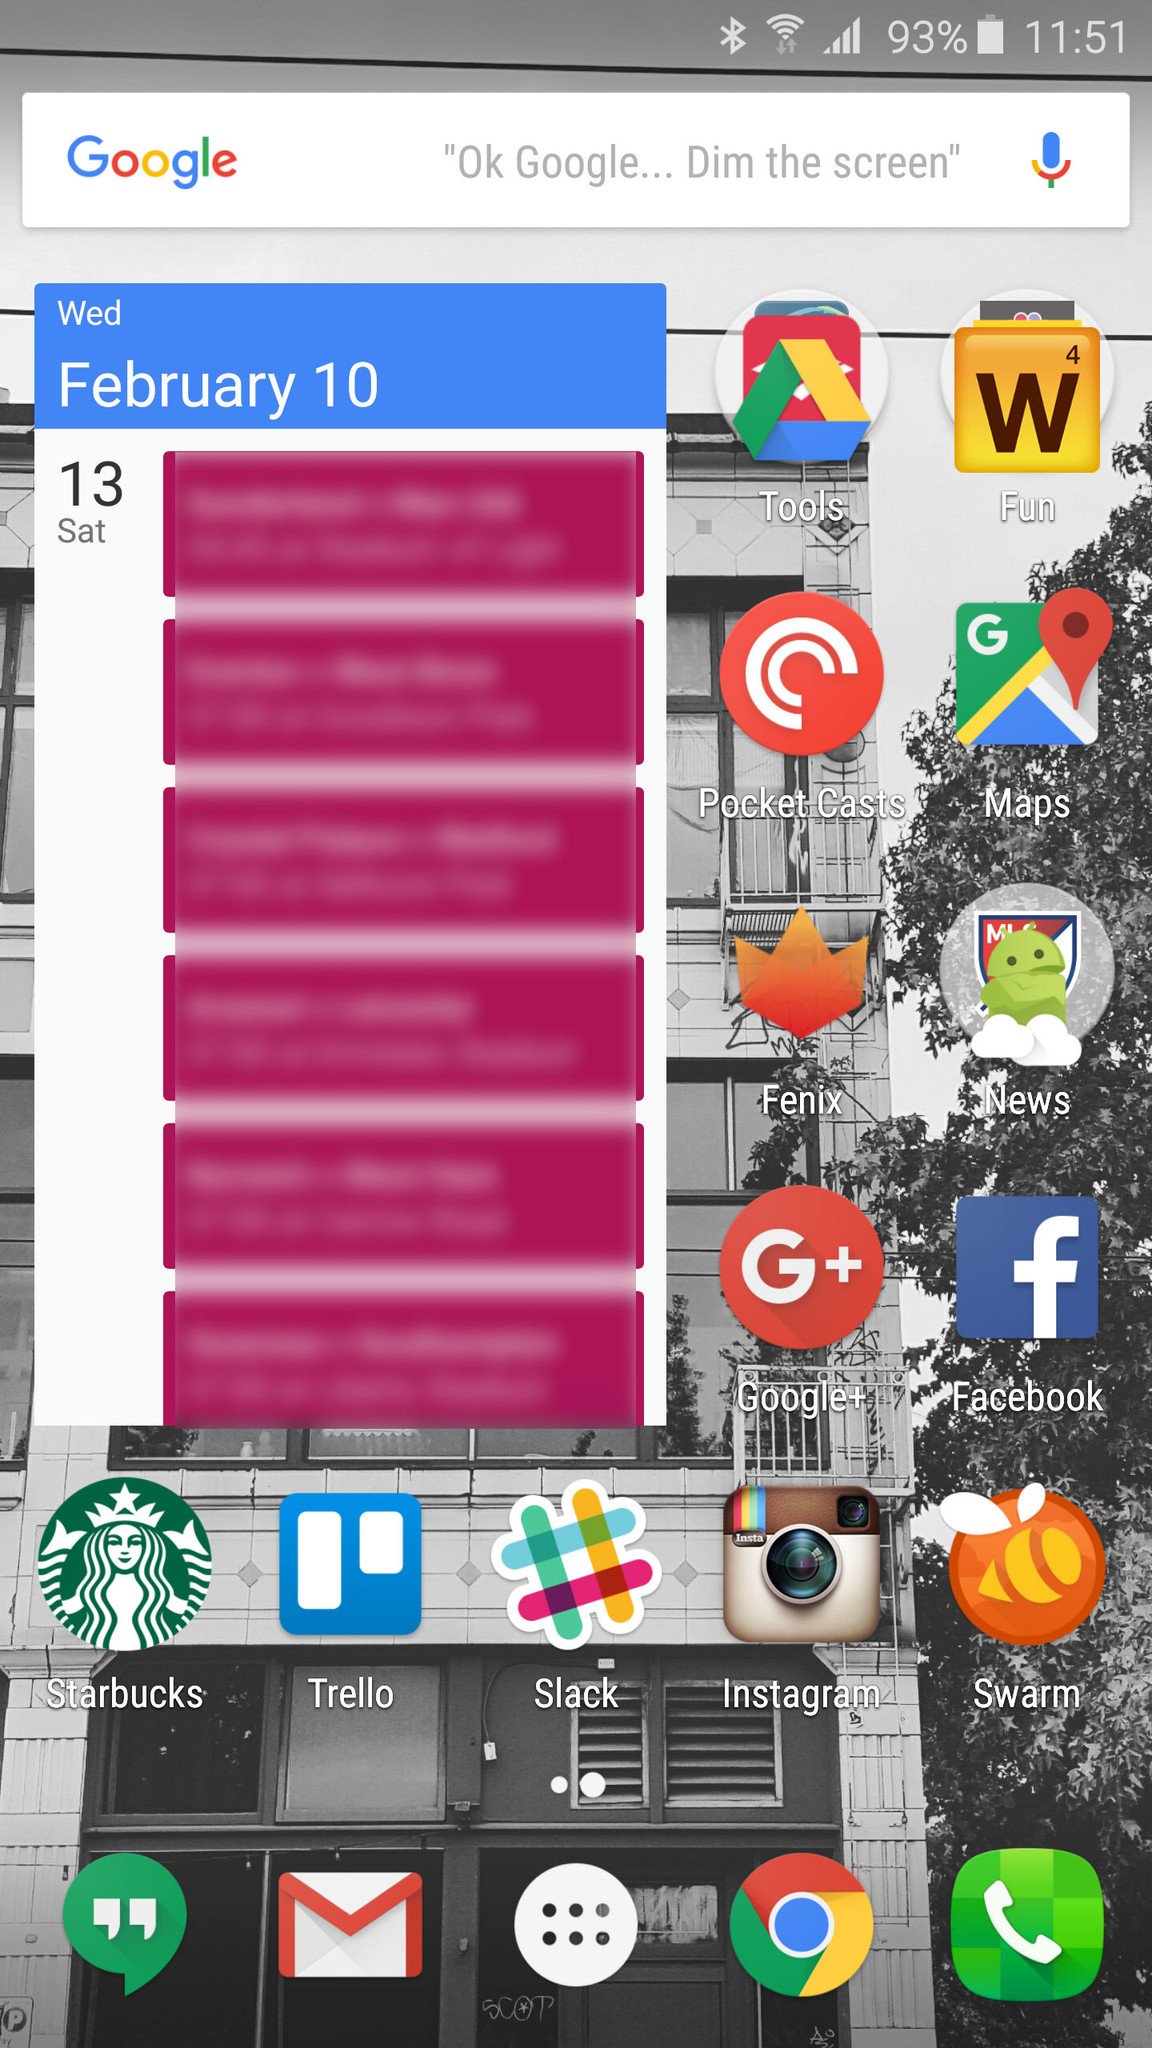 Home screen layouts and how to theme them | Android Central